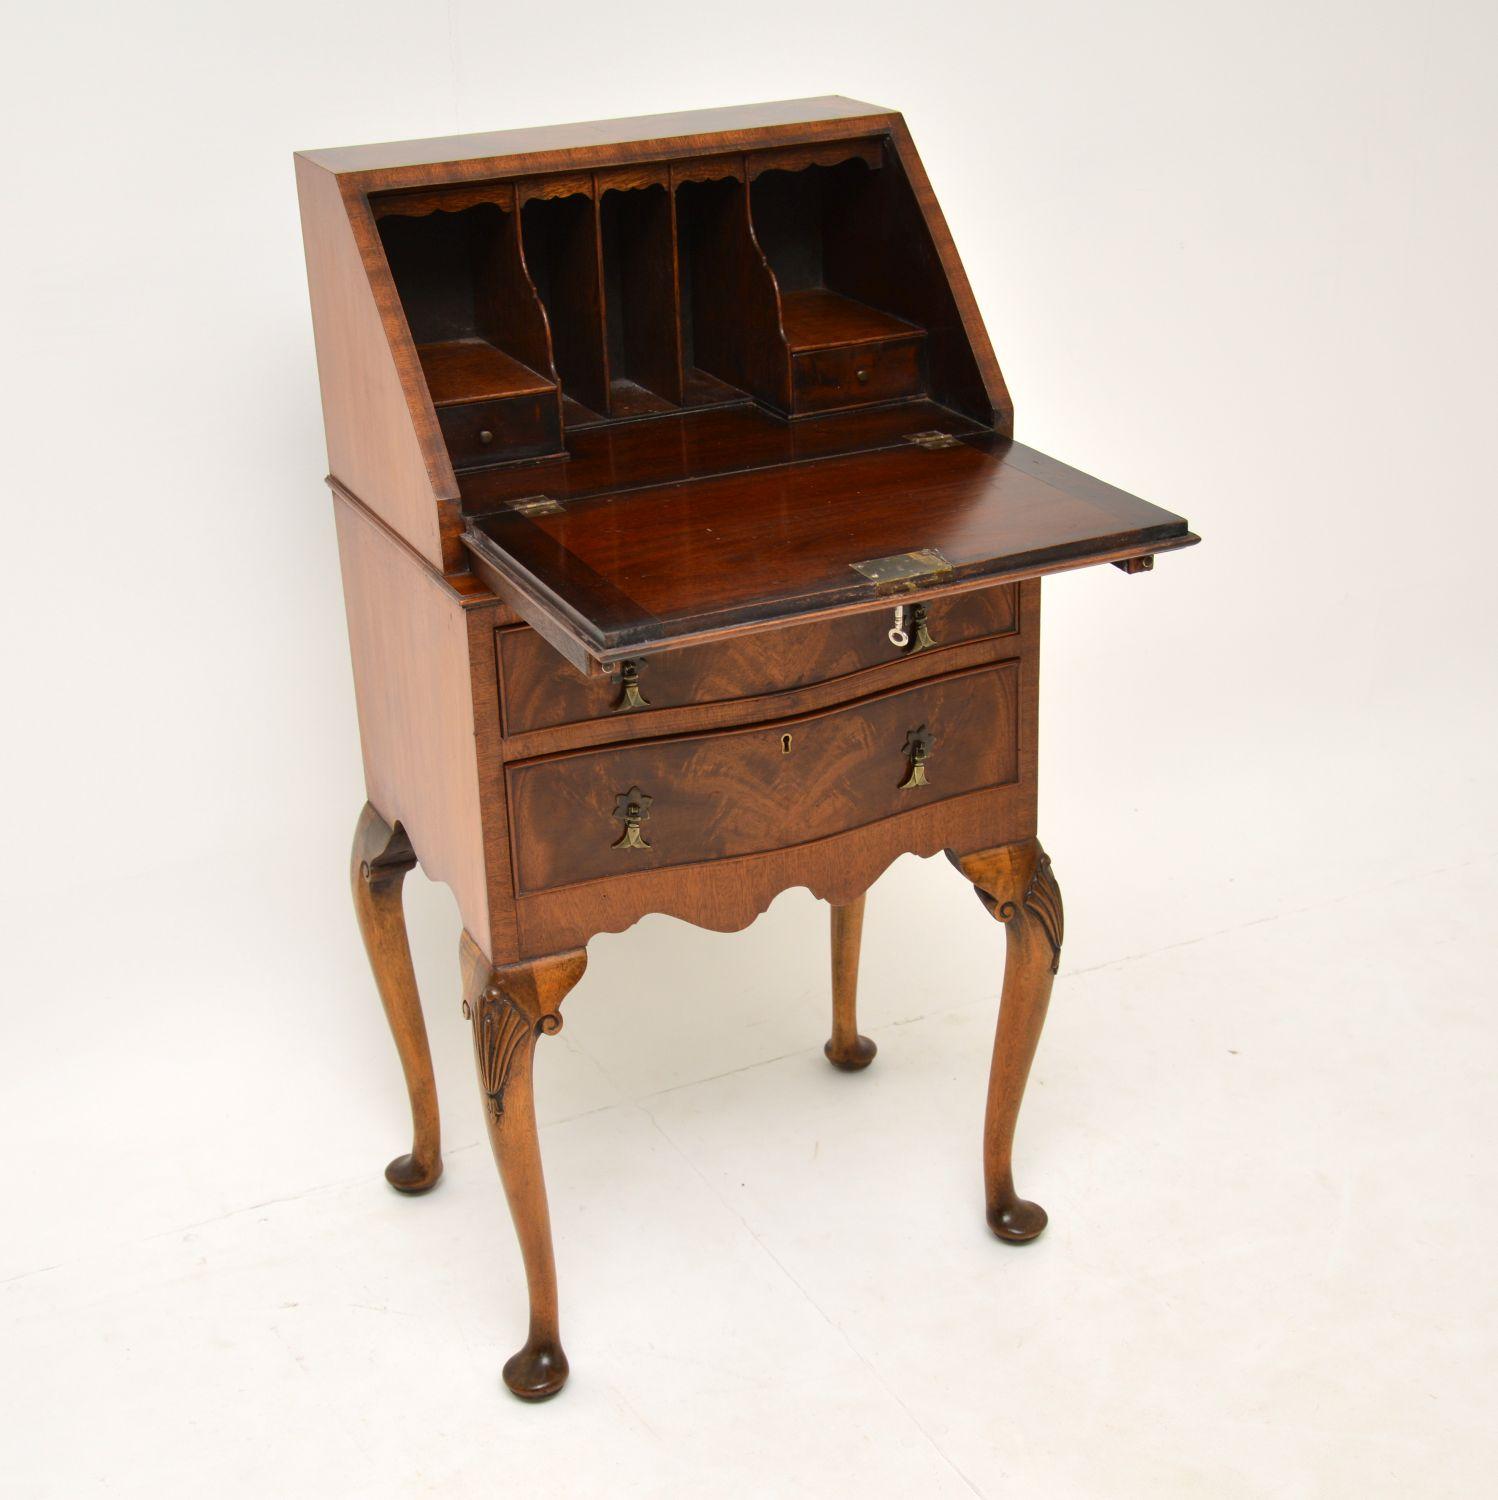 A beautiful and elegant antique writing bureau, dating from the 1890-1910 period.
This is of extremely fine quality, it is a lovely slim and useful size. The flame wood veneers are striking and have a beautiful colour. The construction is all solid